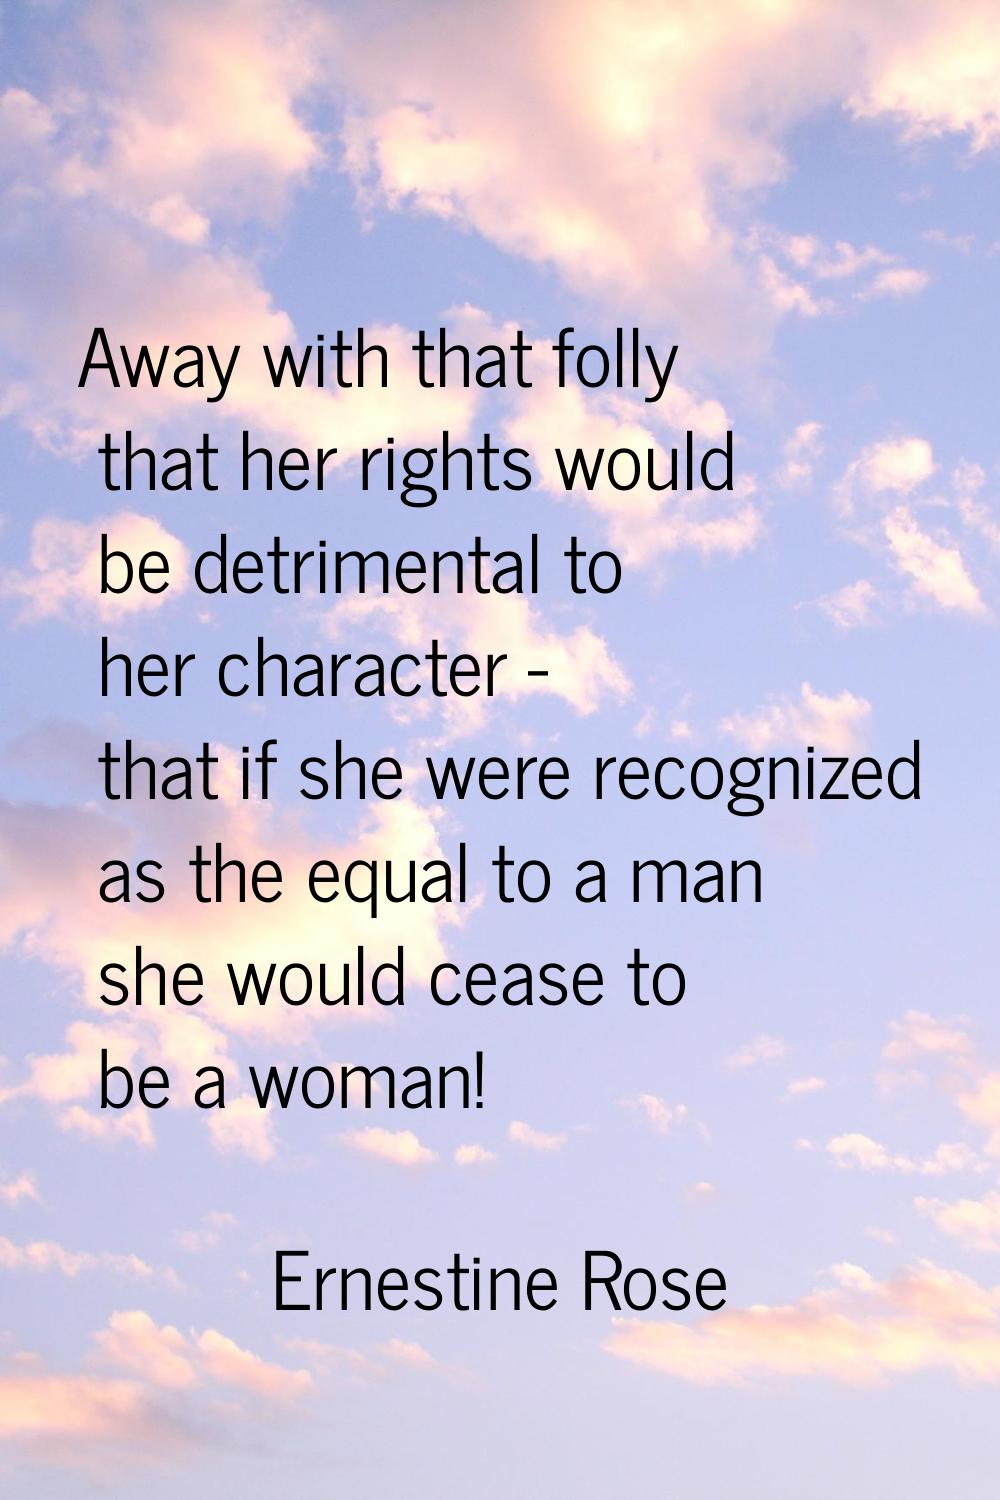 Away with that folly that her rights would be detrimental to her character - that if she were recog